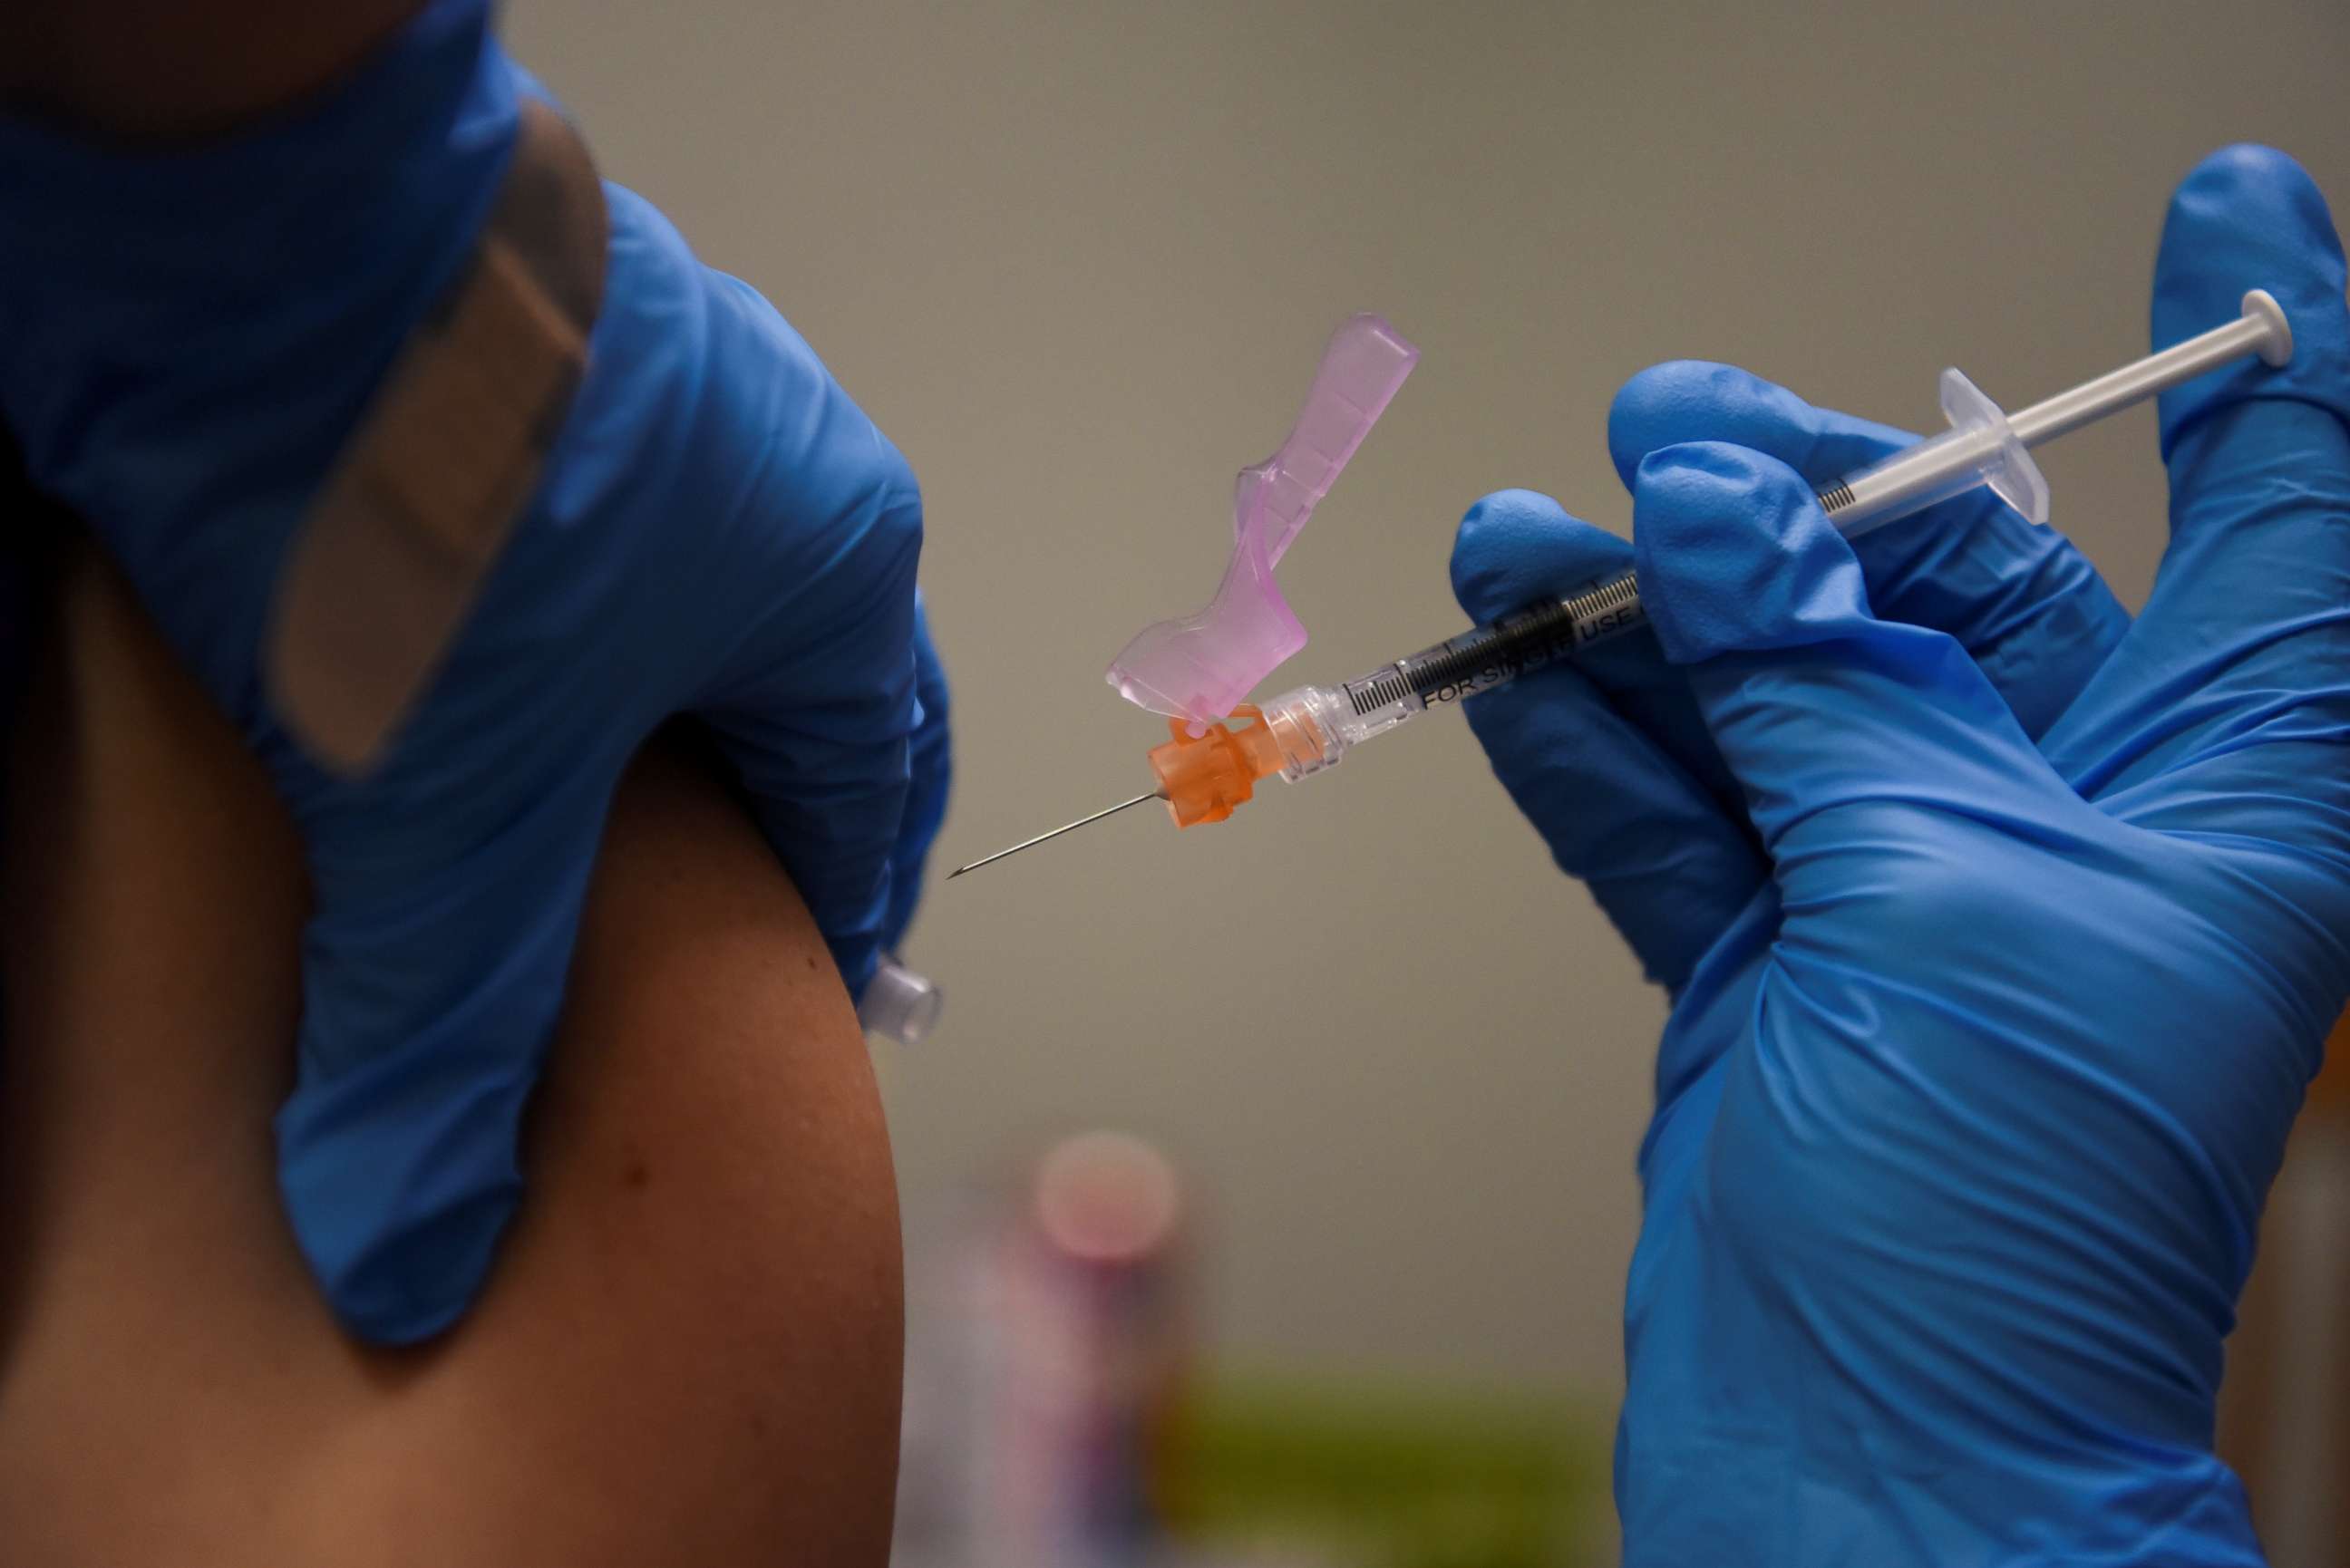 FILE PHOTO: A person receives a COVID-19 vaccine at Floyd's Family Pharmacy as cases of the coronavirus disease (COVID-19) surge in Ponchatoula, Louisiana, U.S., August 5, 2021.